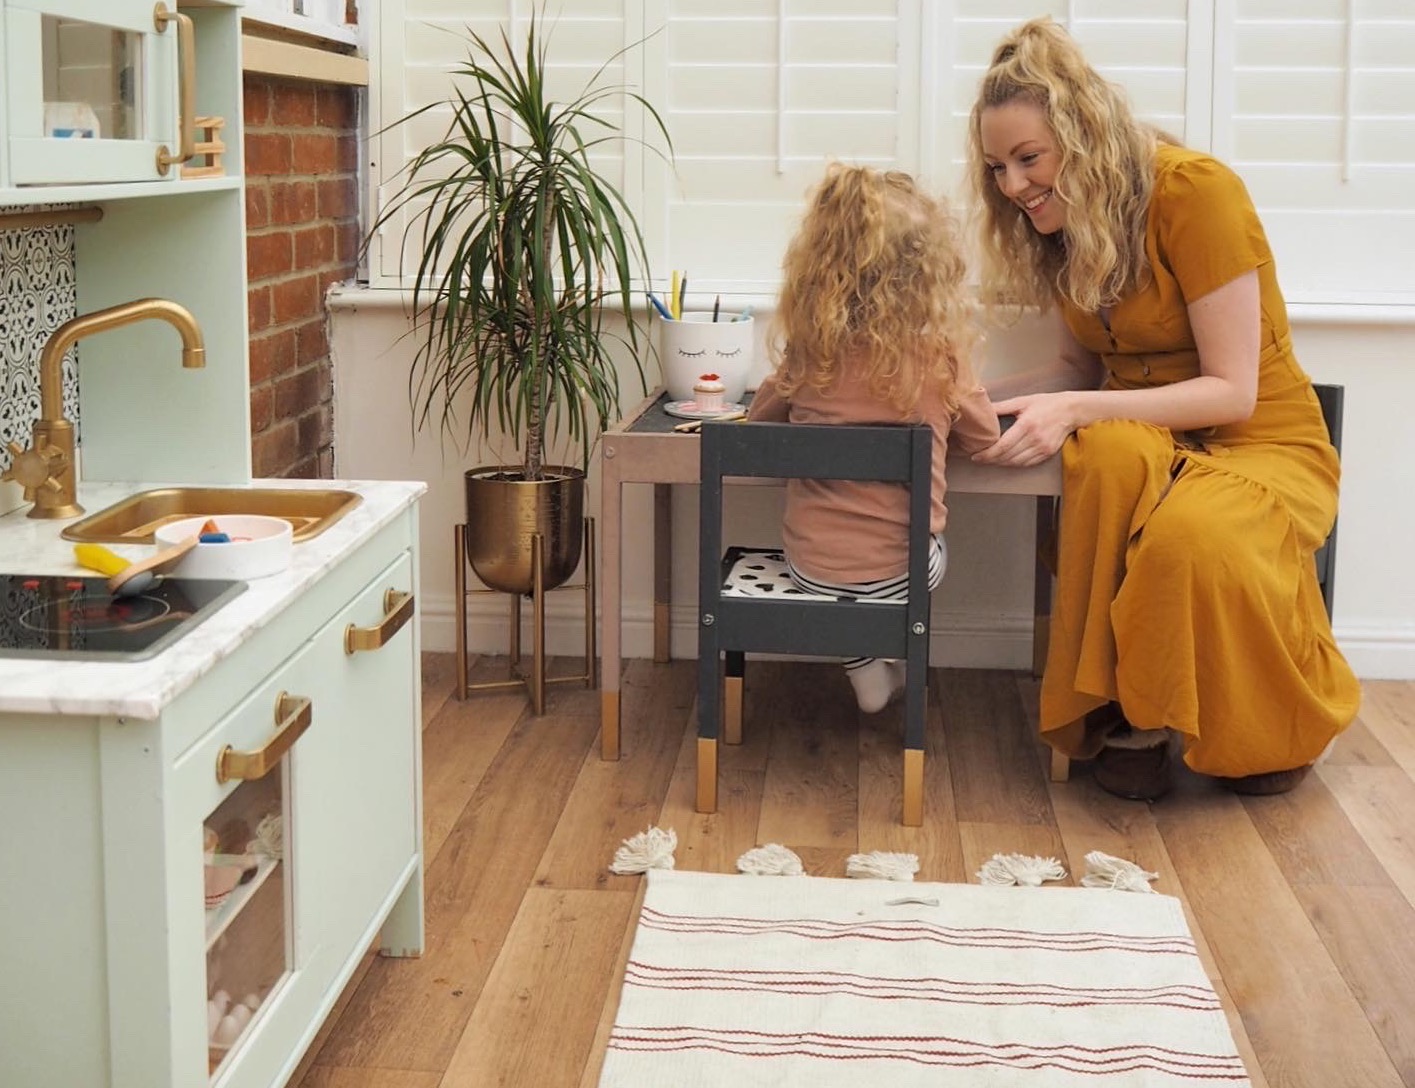 How to organise kids toys in a small home without a playroom. How I try to keep on top of the clutter, and organise my home without it getting too cluttered. Organising an IKEA Ivar unit with plastic tubs to organise toys, stationary and crafting bits. Tips for organising your home and decluttering, whilst still keeping your home looking stylish.